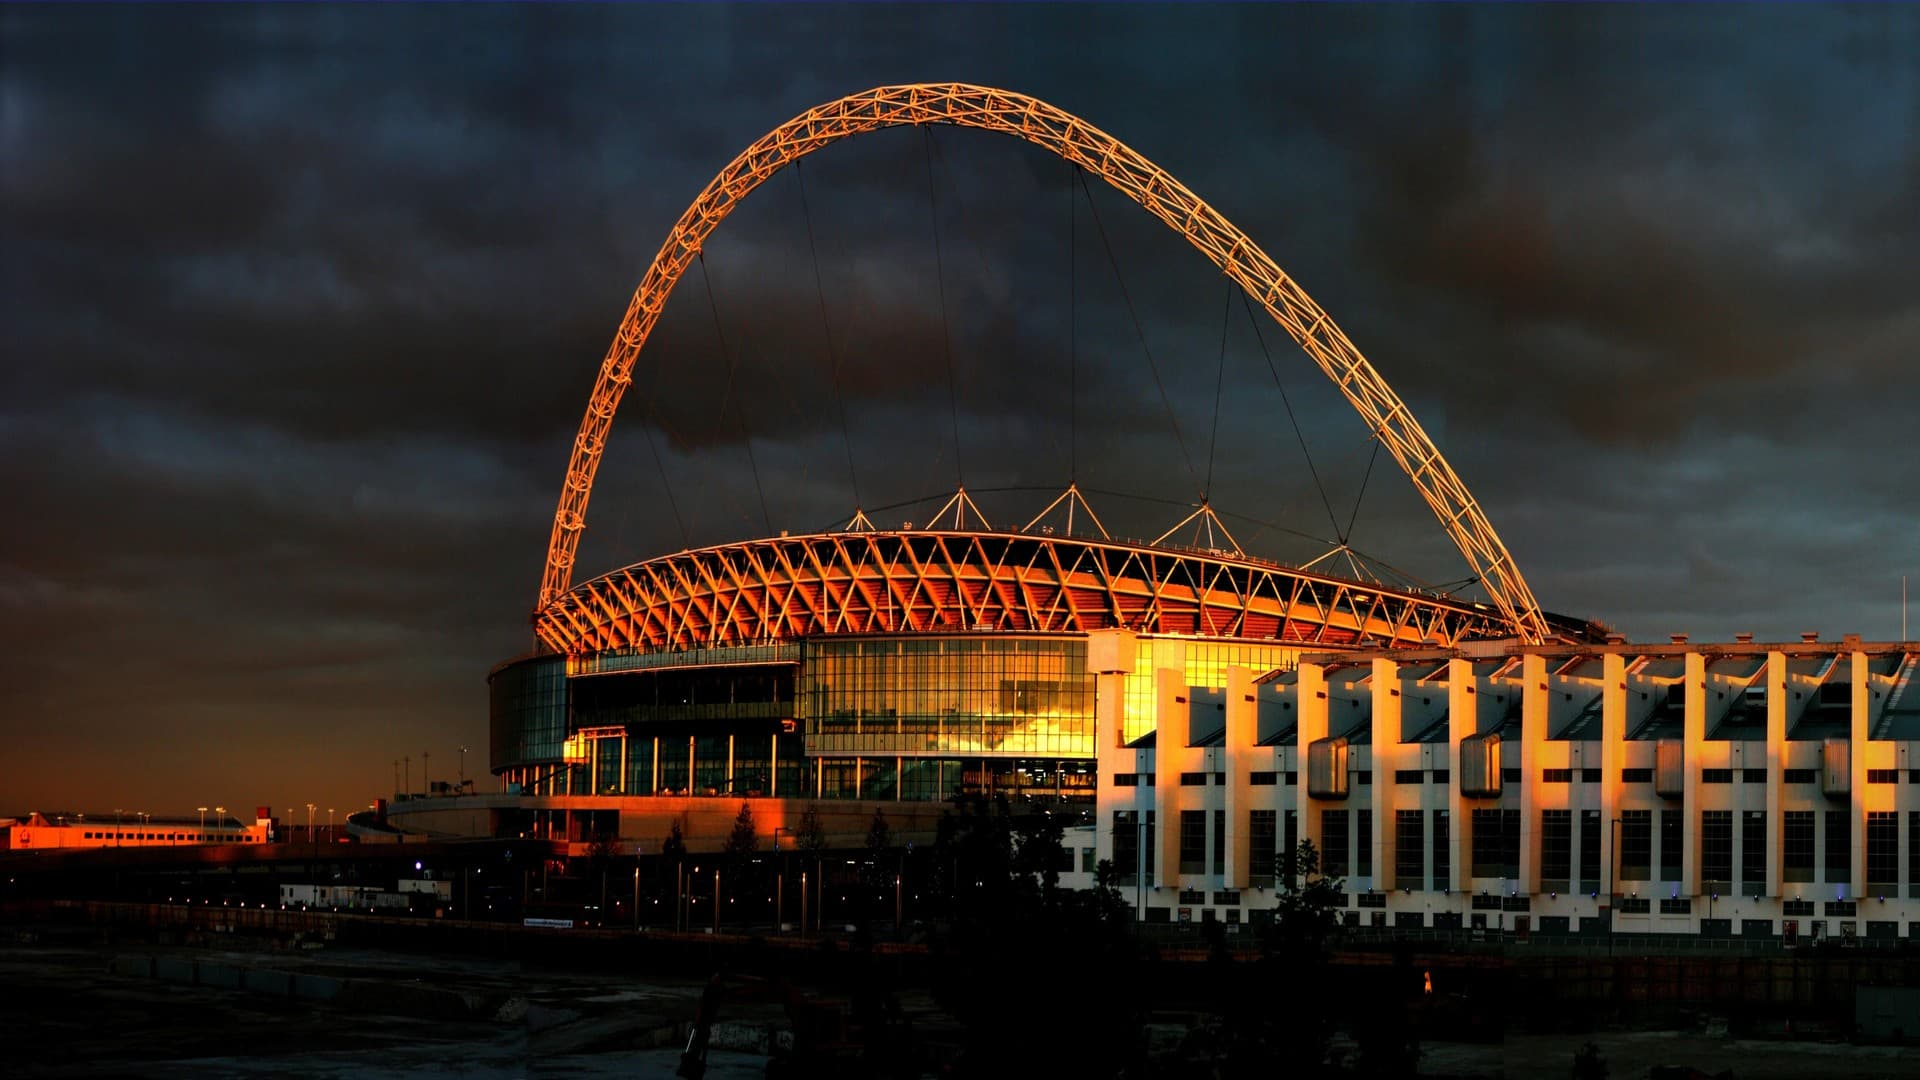 Wembley, the United Kingdom - Most beautiful soccer stadium in the world